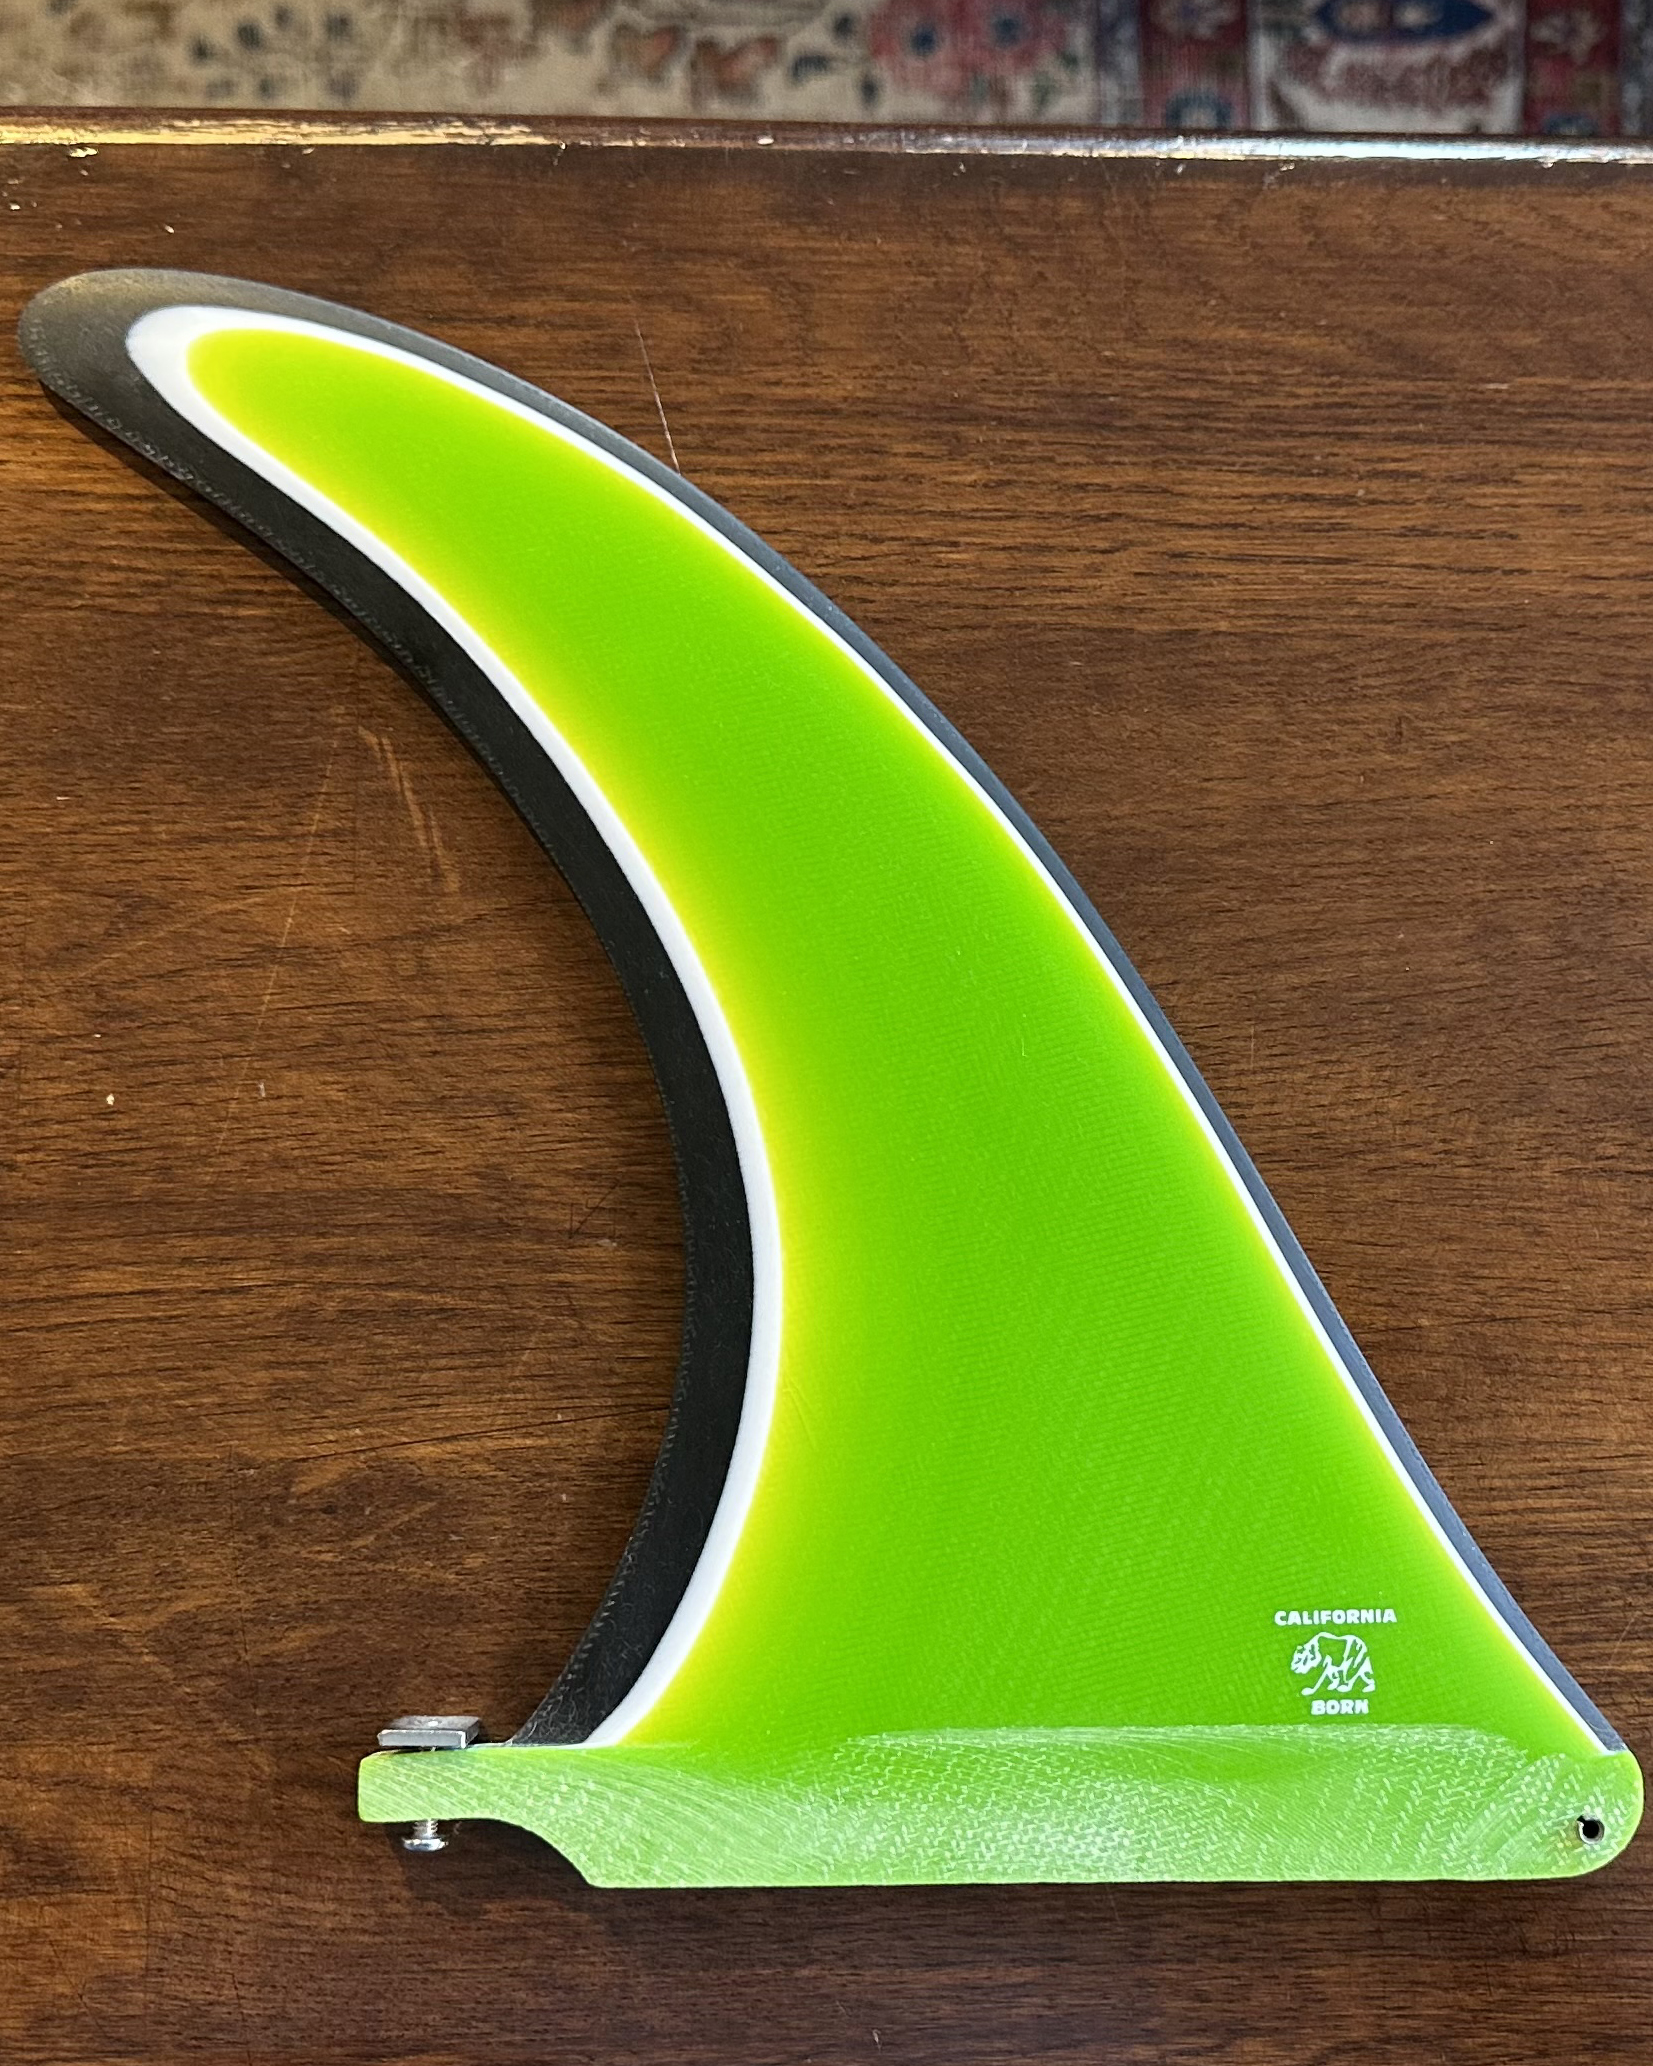 Mikey DeTemple 3 10.0 - Green/White